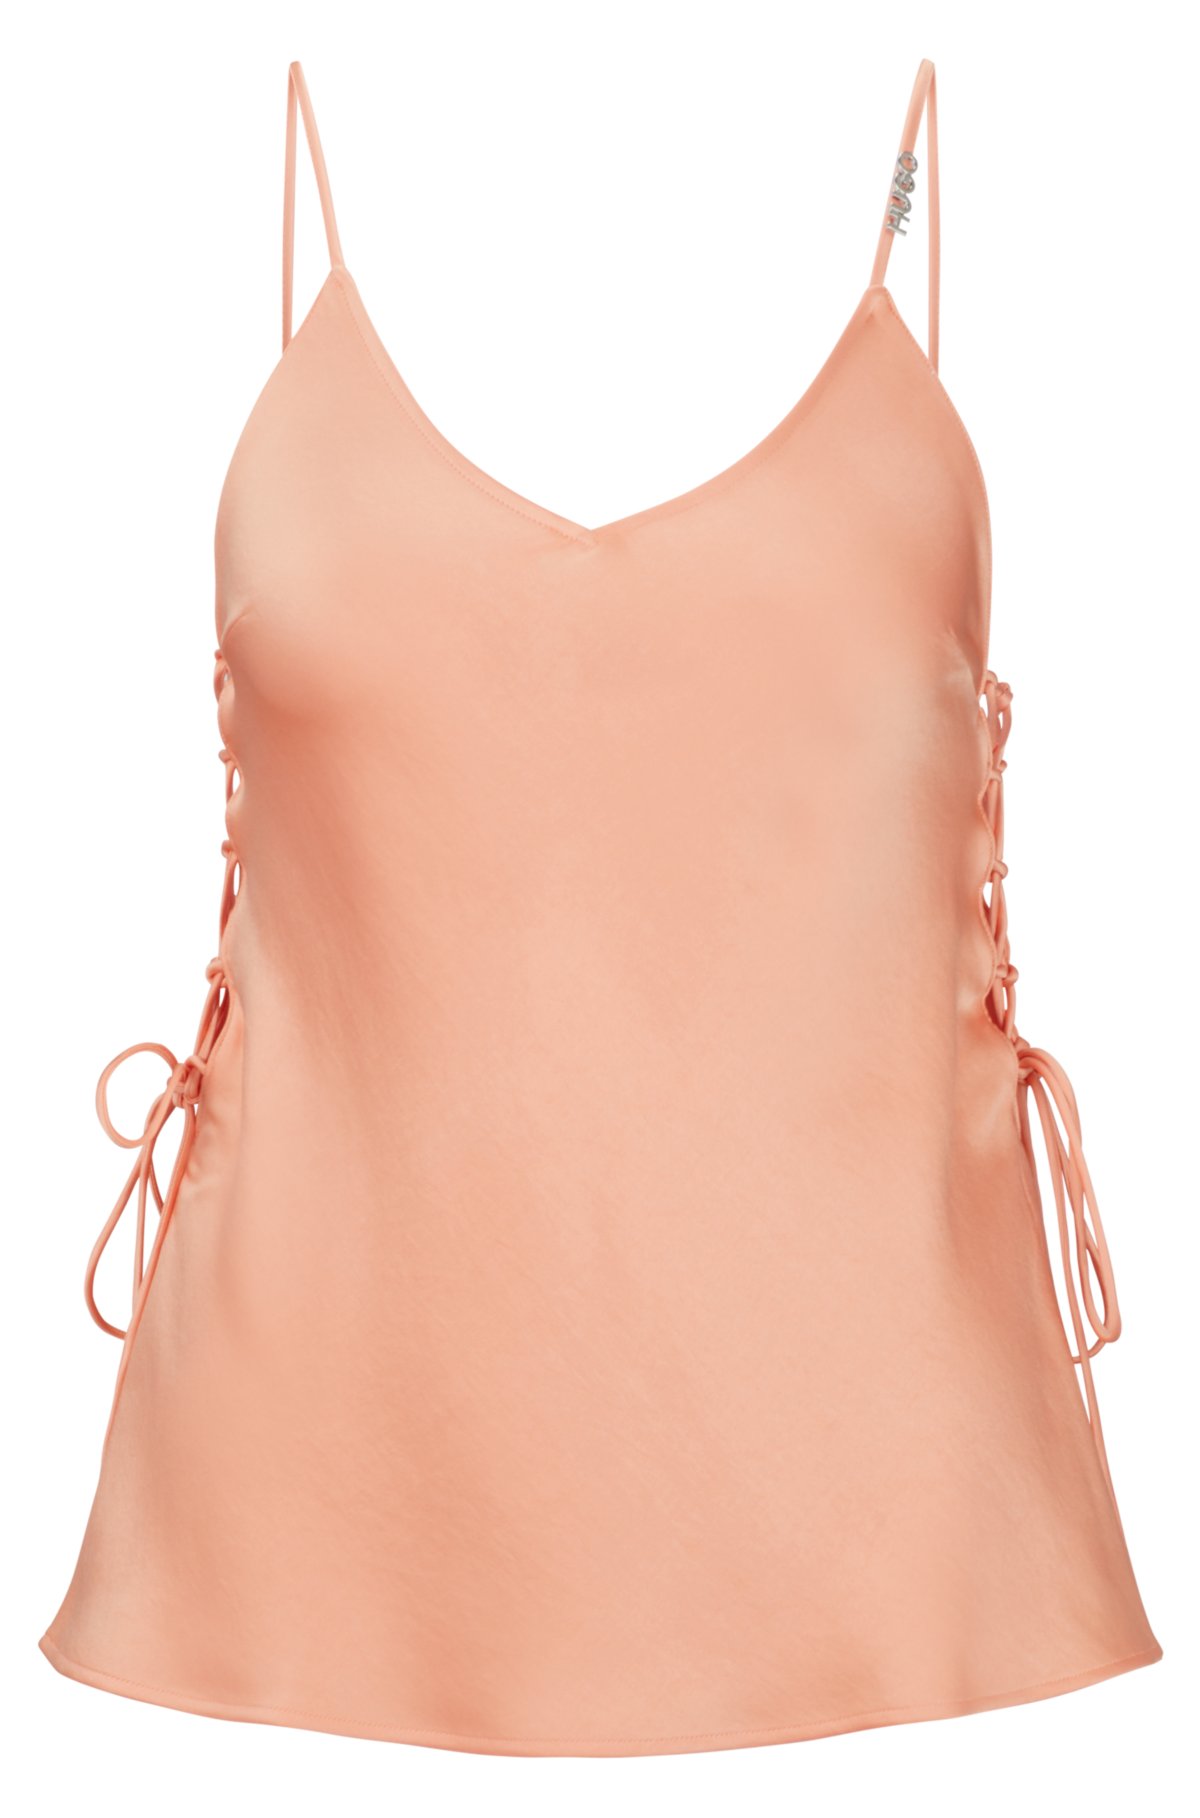 Blossom Lace Cami Bustier Top in Nude Pink - Retro, Indie and